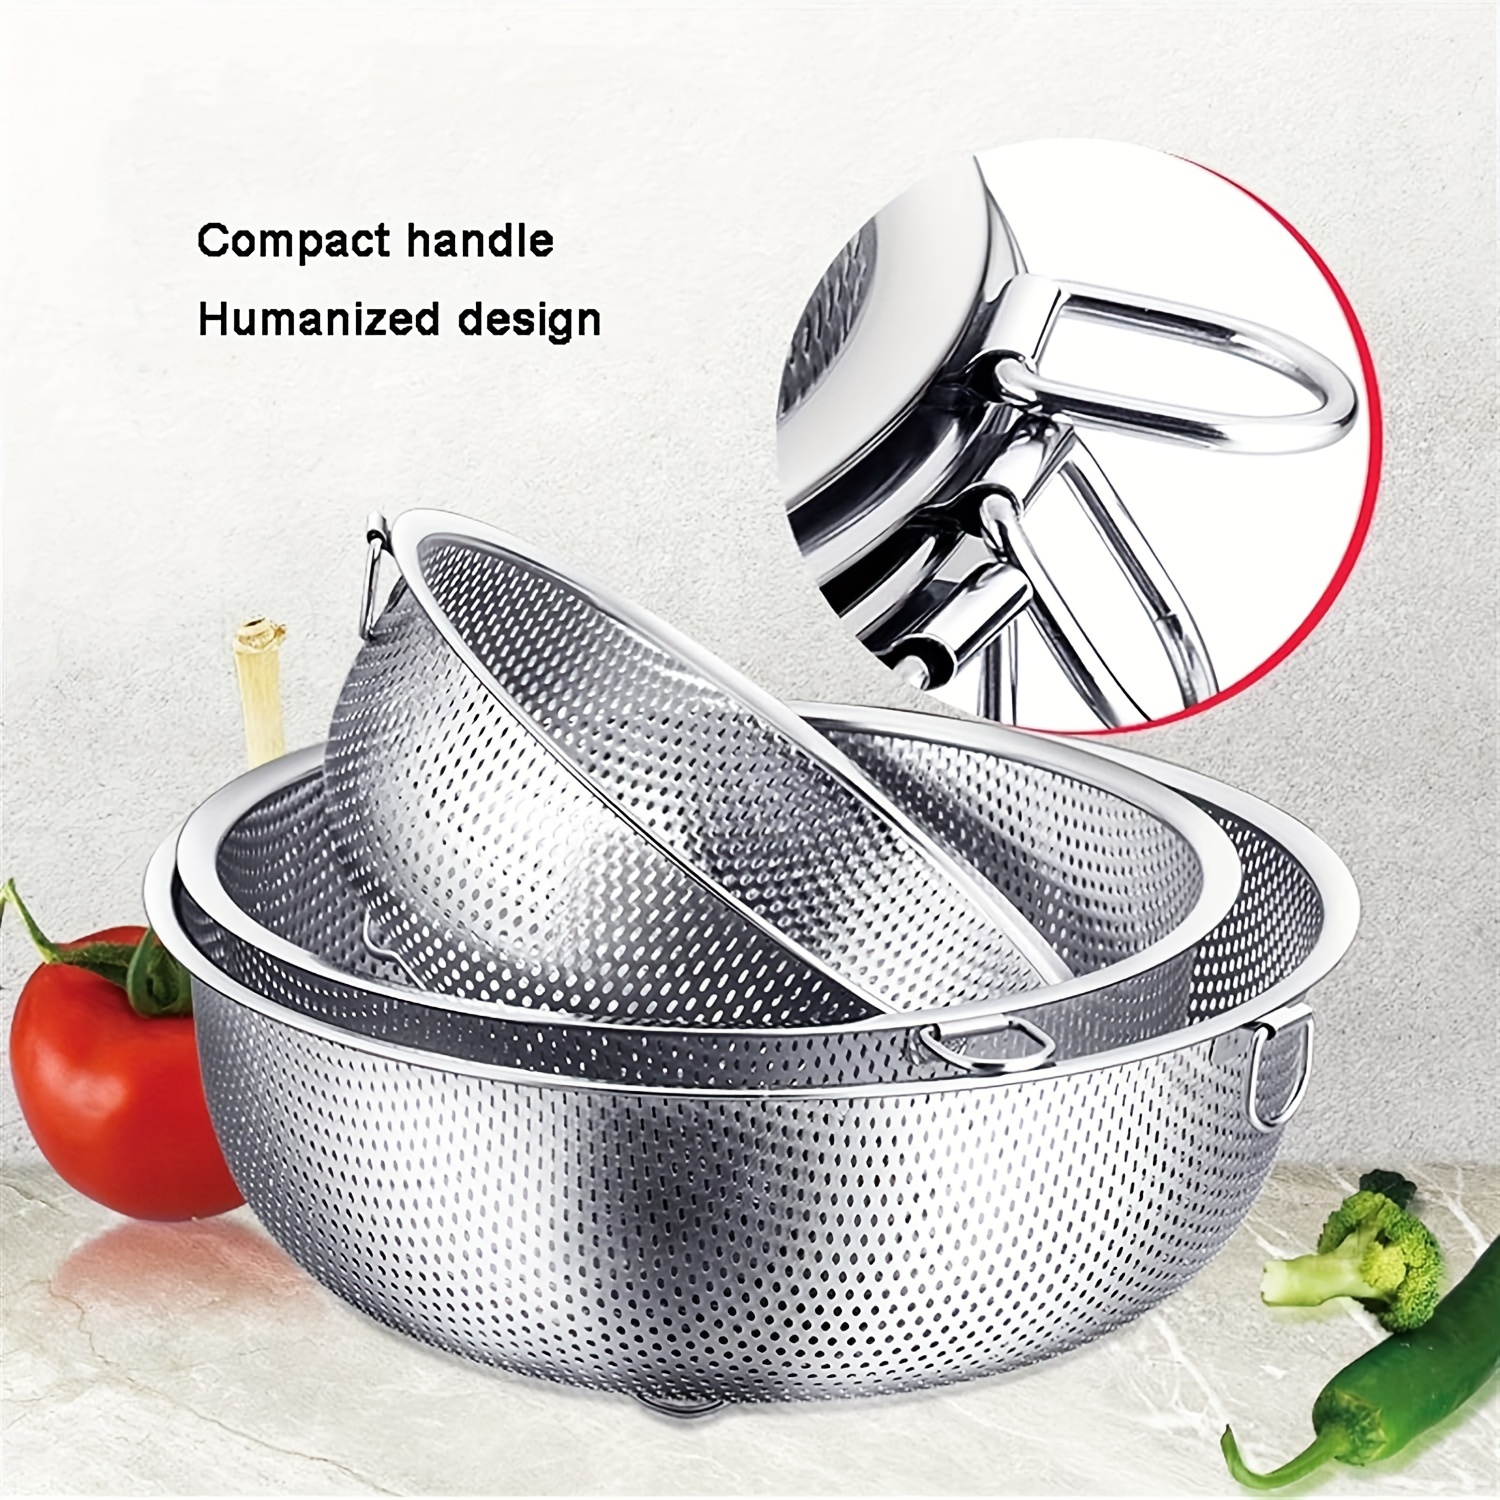 

3-piece Stainless Steel Colander Set - Kitchen Sink Strainer Basket With Compact Handles - Thick, Durable Drain Basket For Washing Vegetables, Rice, And Fruits - Home Use Small Hole Draining Device